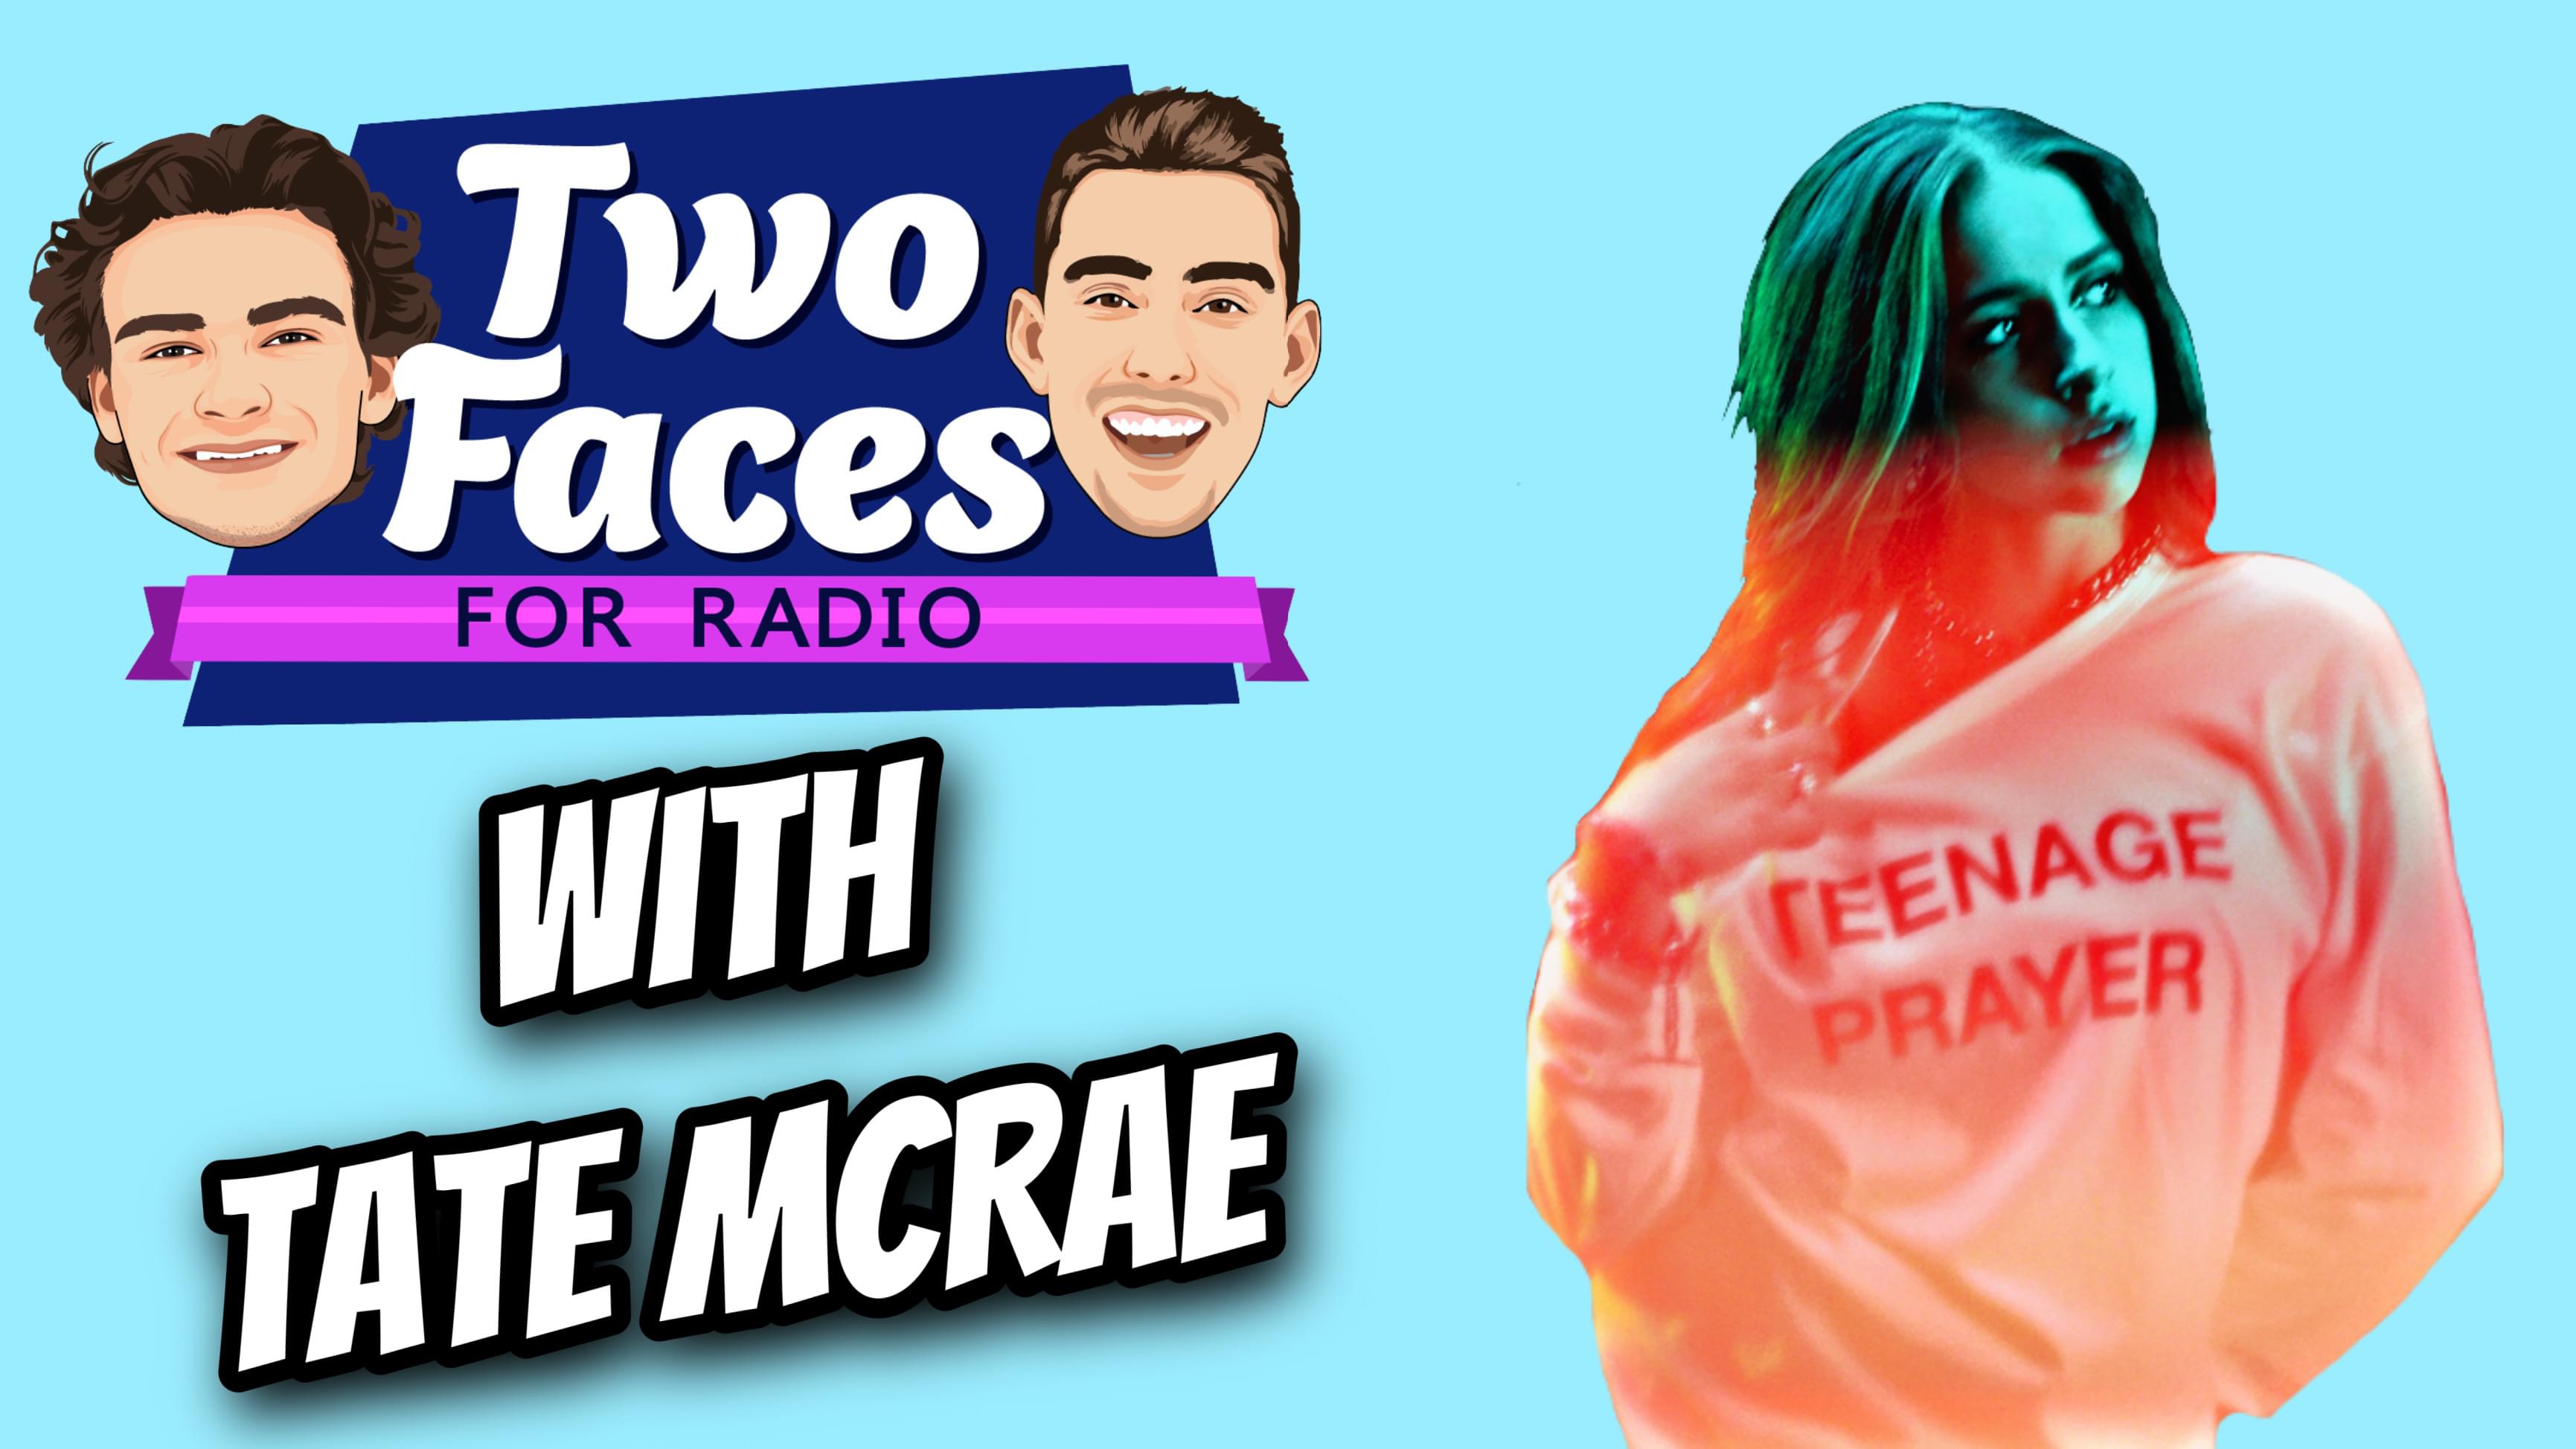 Tate McRae Interview On The ‘Two Faces For Radio’ Podcast [WATCH]